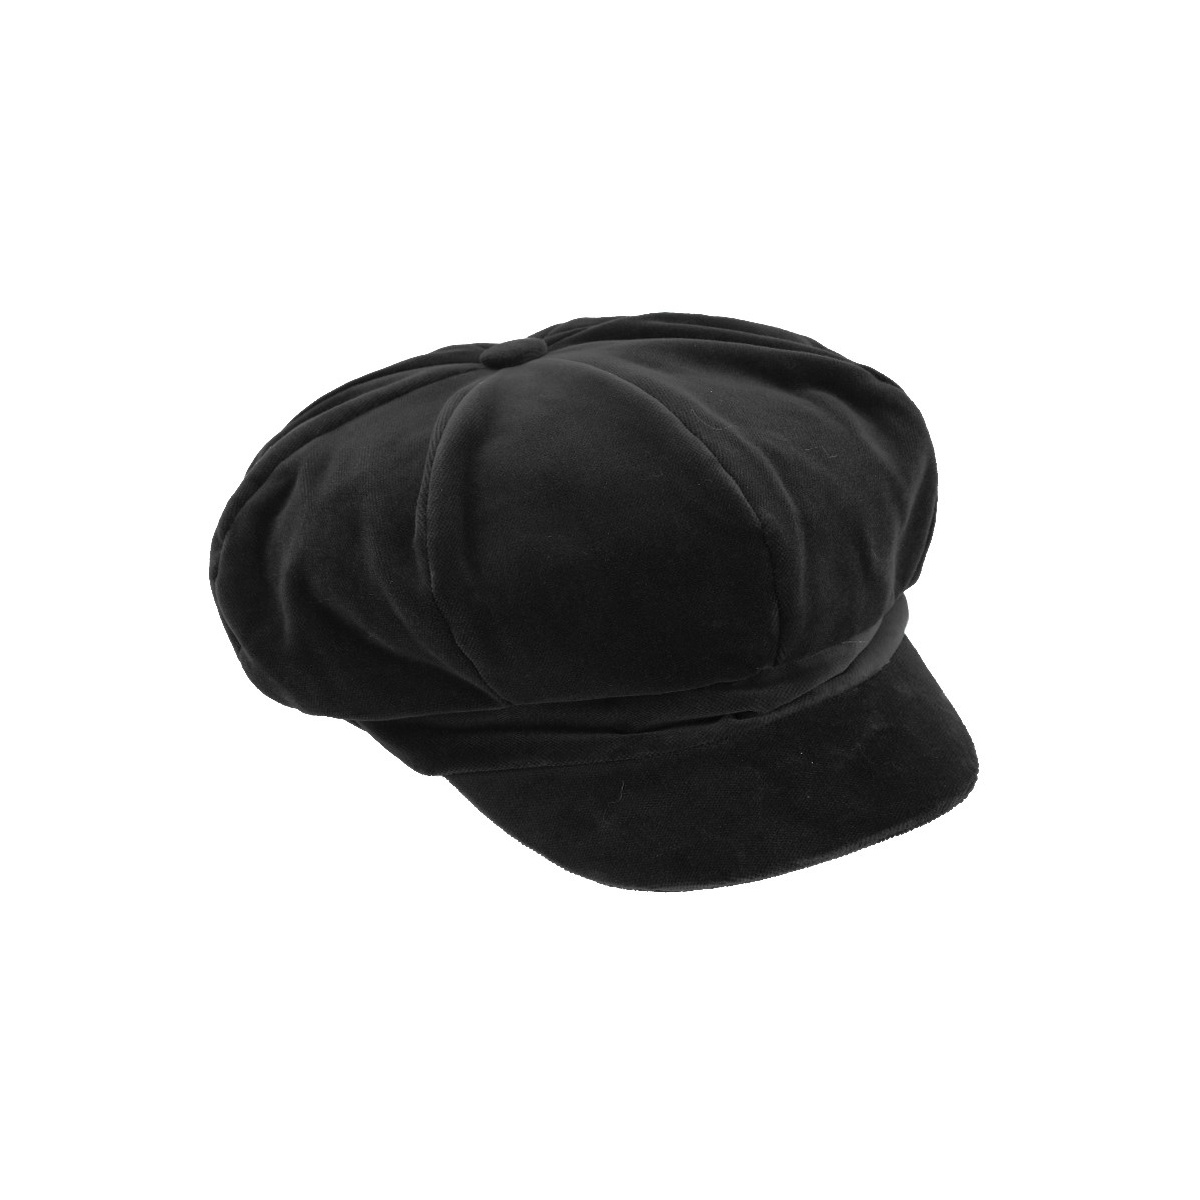 Casquette Femme Anna polaire NOIRE - TRACLET Reference : 13456